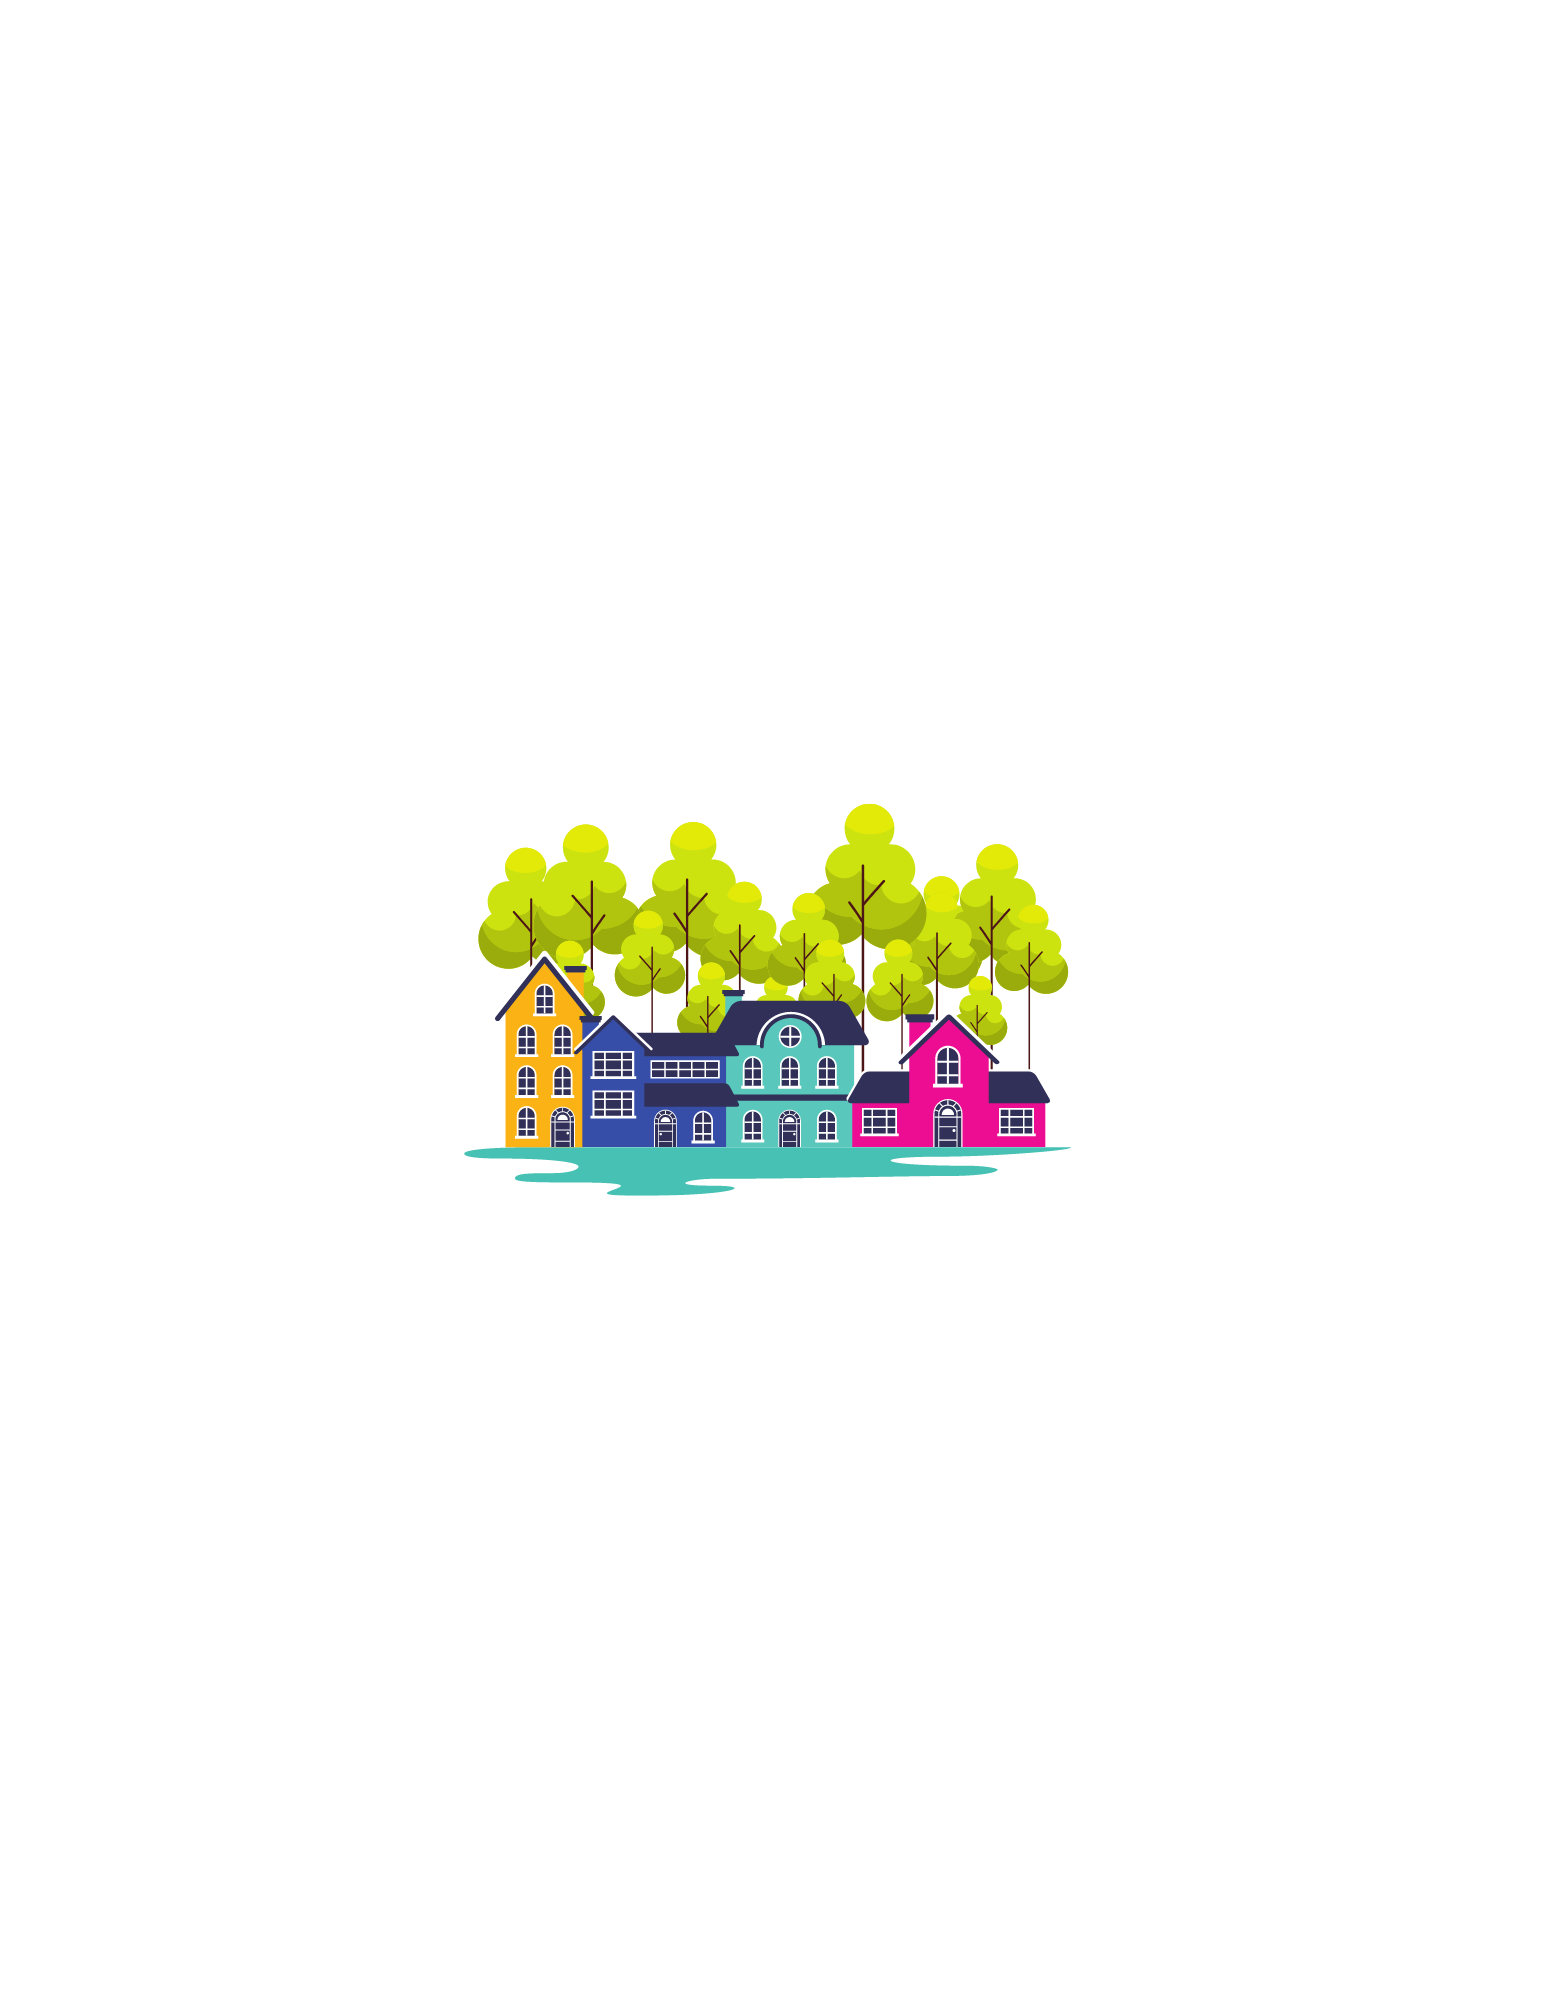 picture with trees and houses